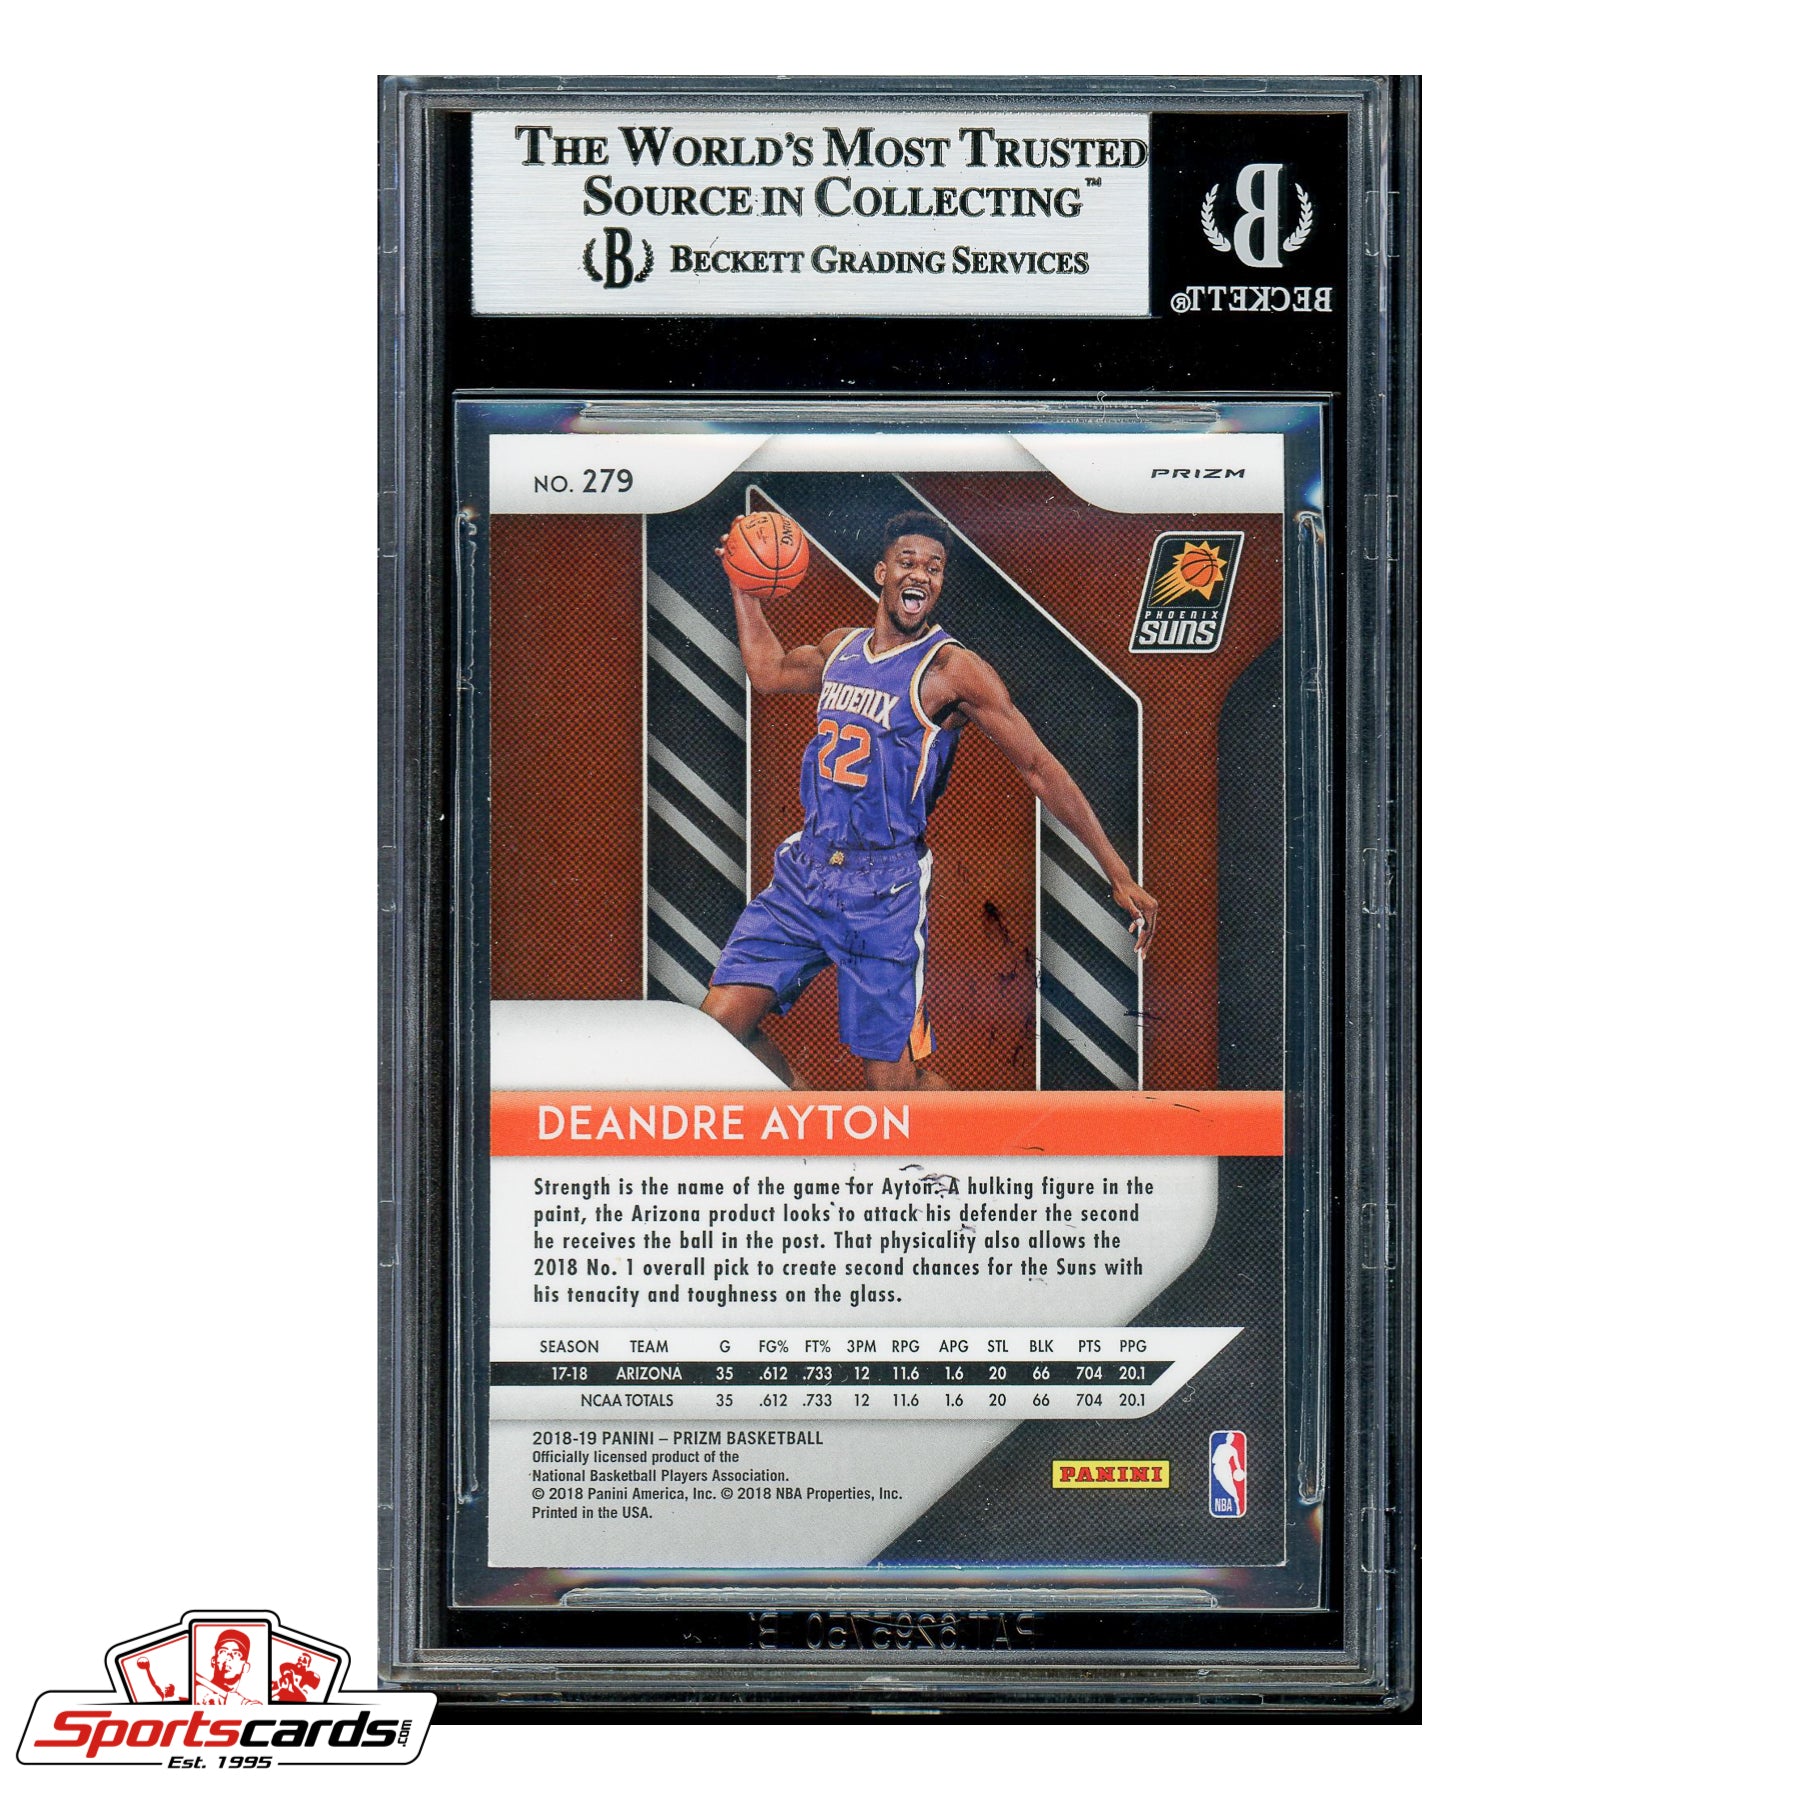 Deandre Ayton Signed Auto 2018-19 Panini Prizm Green #279 RC BAS Rookie Cards Suns